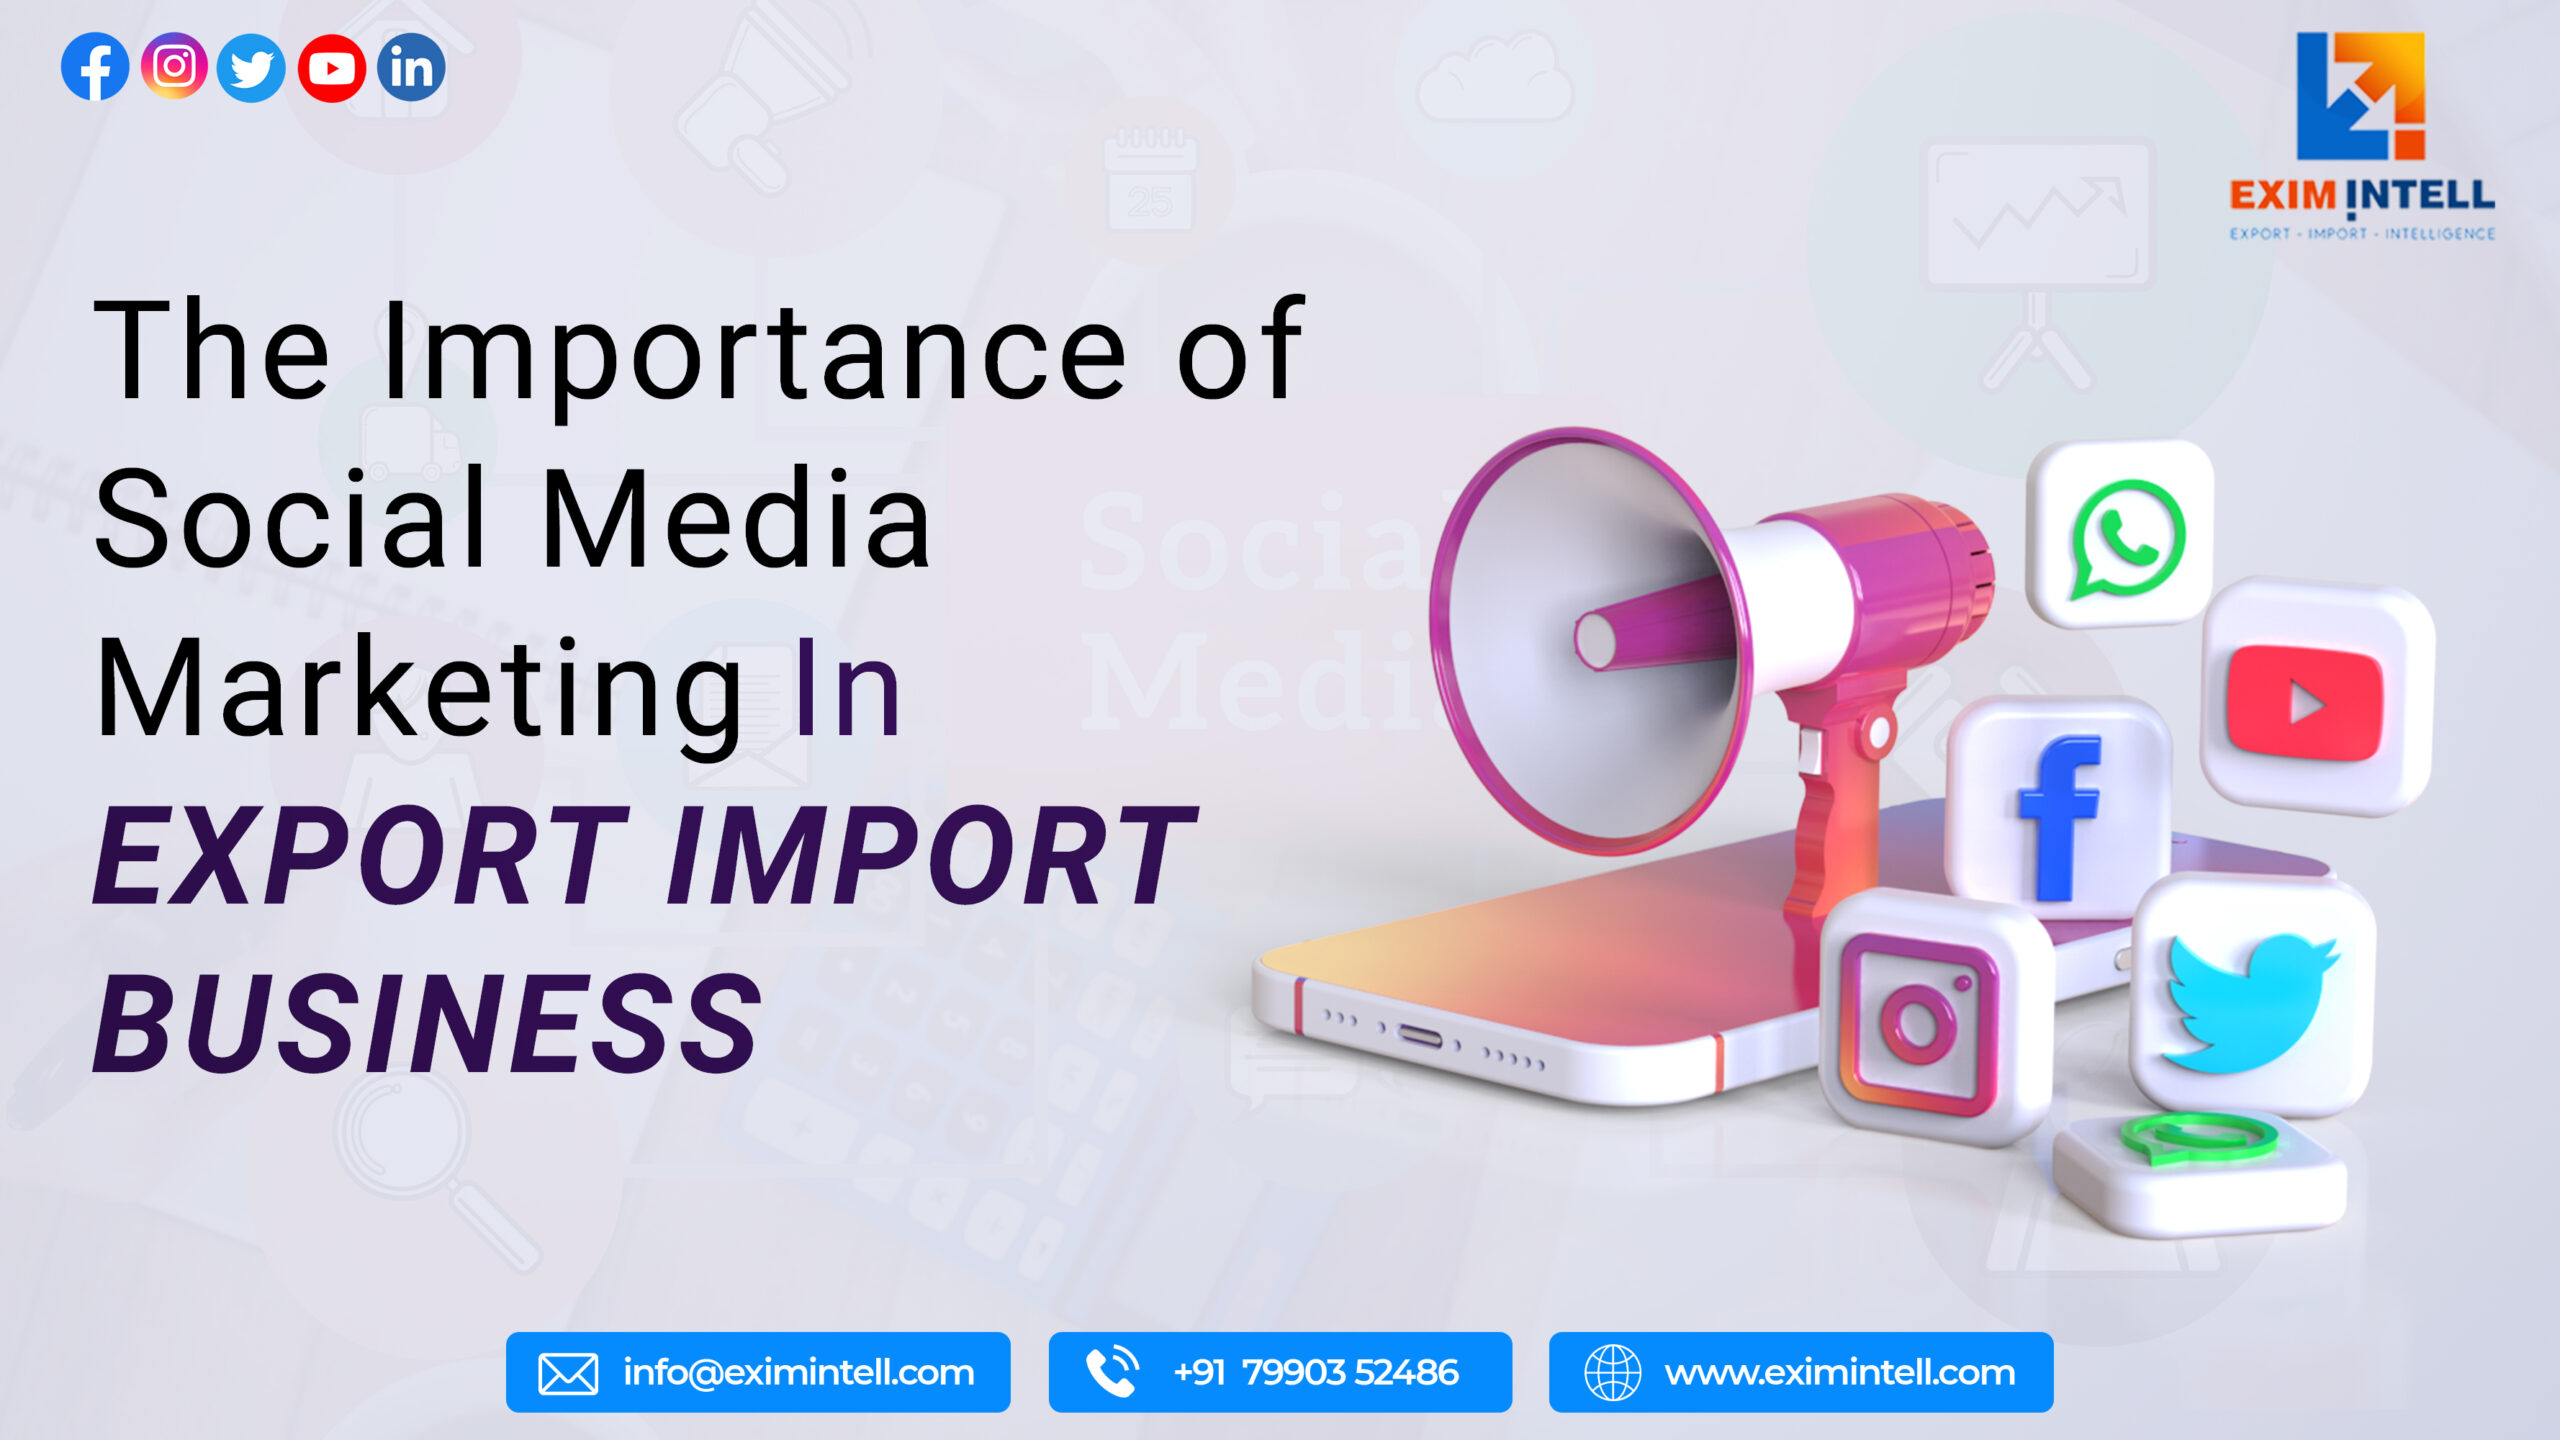 The Importance of Social Media Marketing In Export Import Business